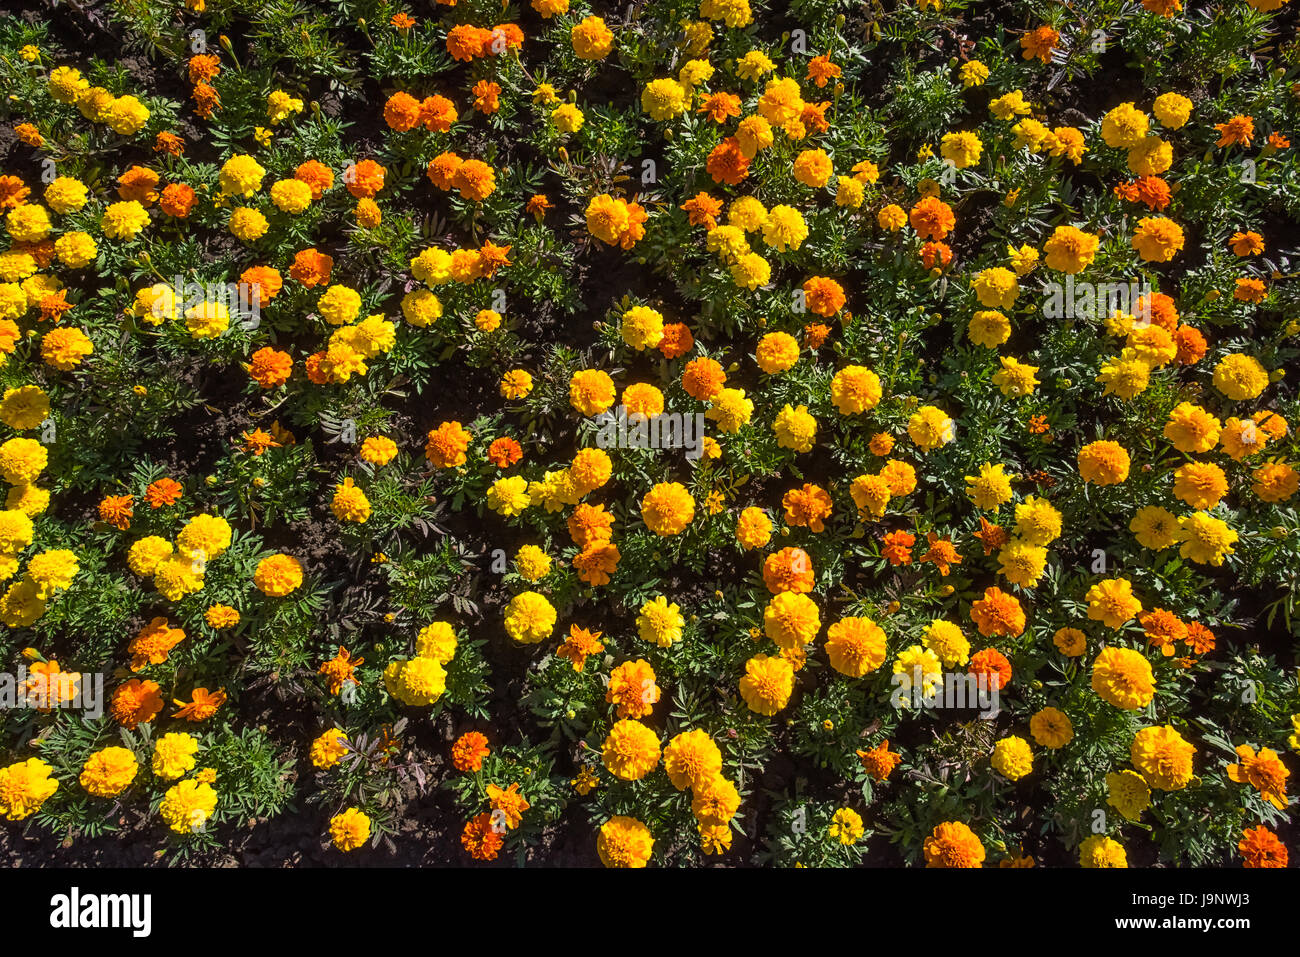 Closeup top view of colorful blooming yellow and orange tagetes or marigold flowerbed in sunshine with unfocused background Stock Photo